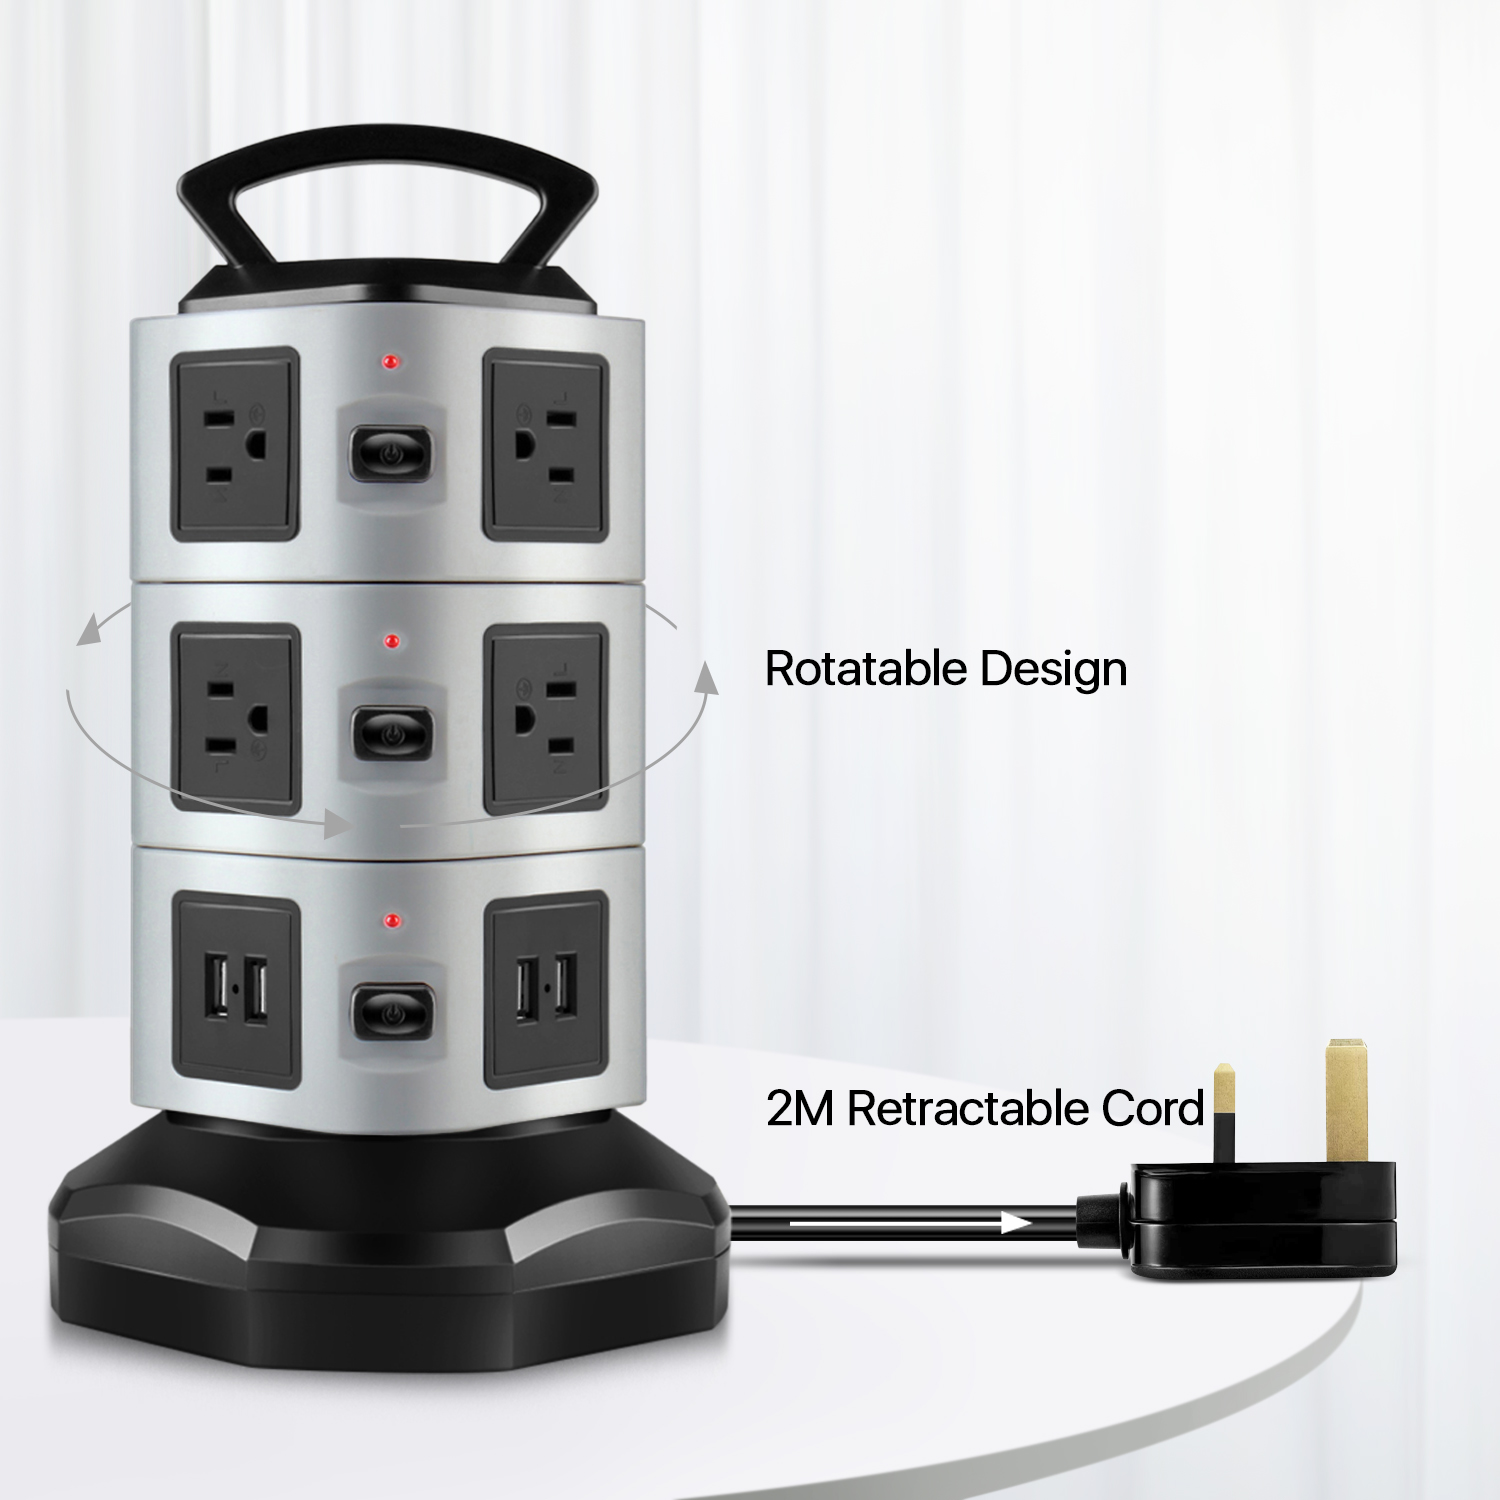 [Retractable Power Cord]: With 6ft extension cord, your devices are always within reach. the power cable can retract into the tower socket base. Adjust and set the cord length according to your preference or needs. This portable and space saving features making it convenient for home and office use